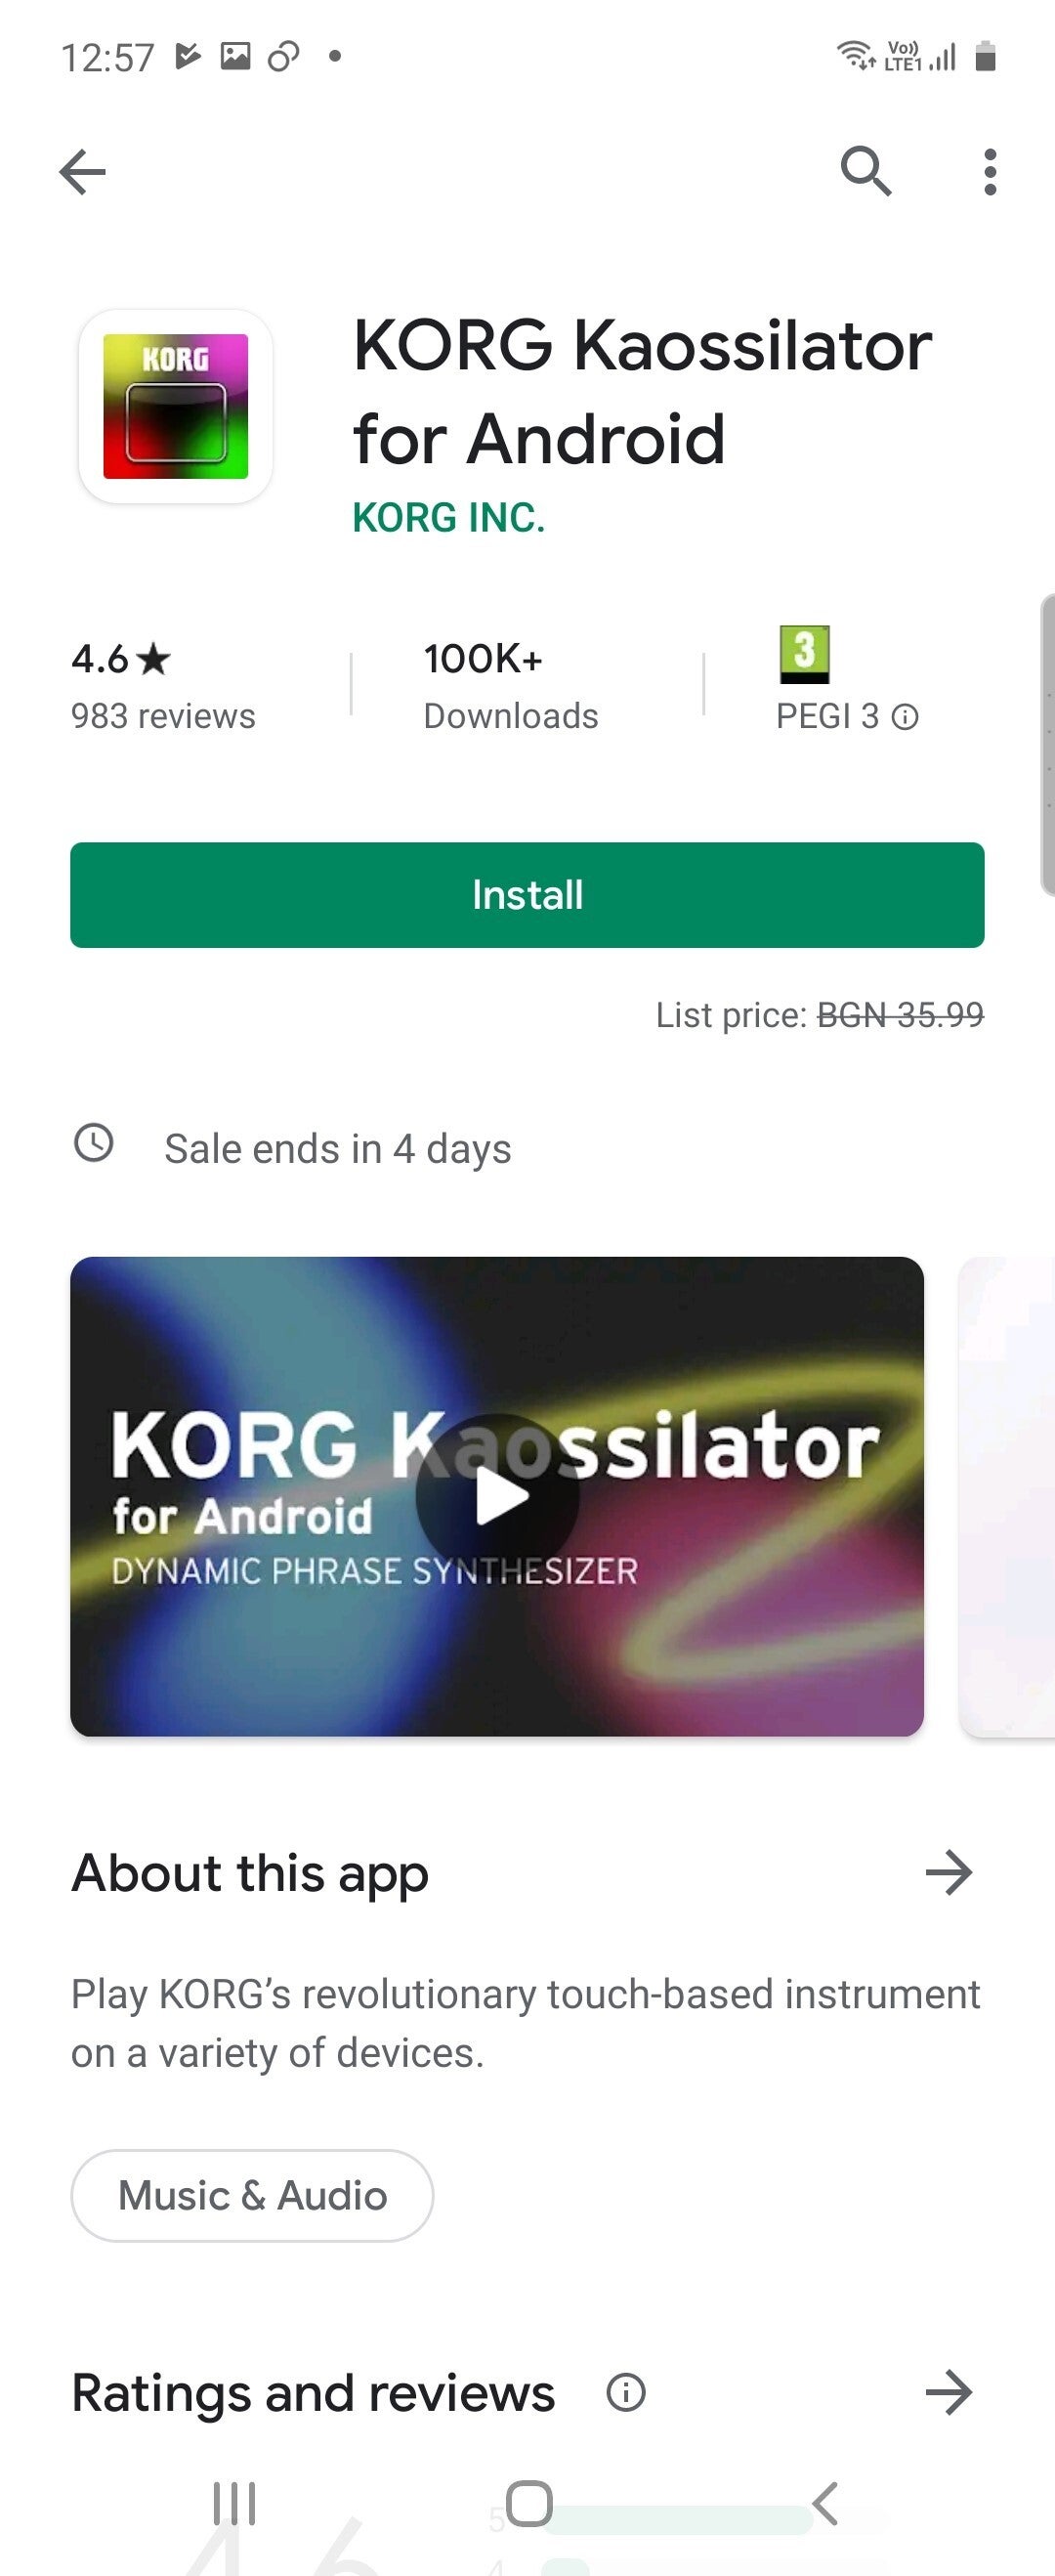 Korg Koassilator app for Android from Google Play Store - Musicians and fans can now profit from free synth apps due to the coronavirus situation